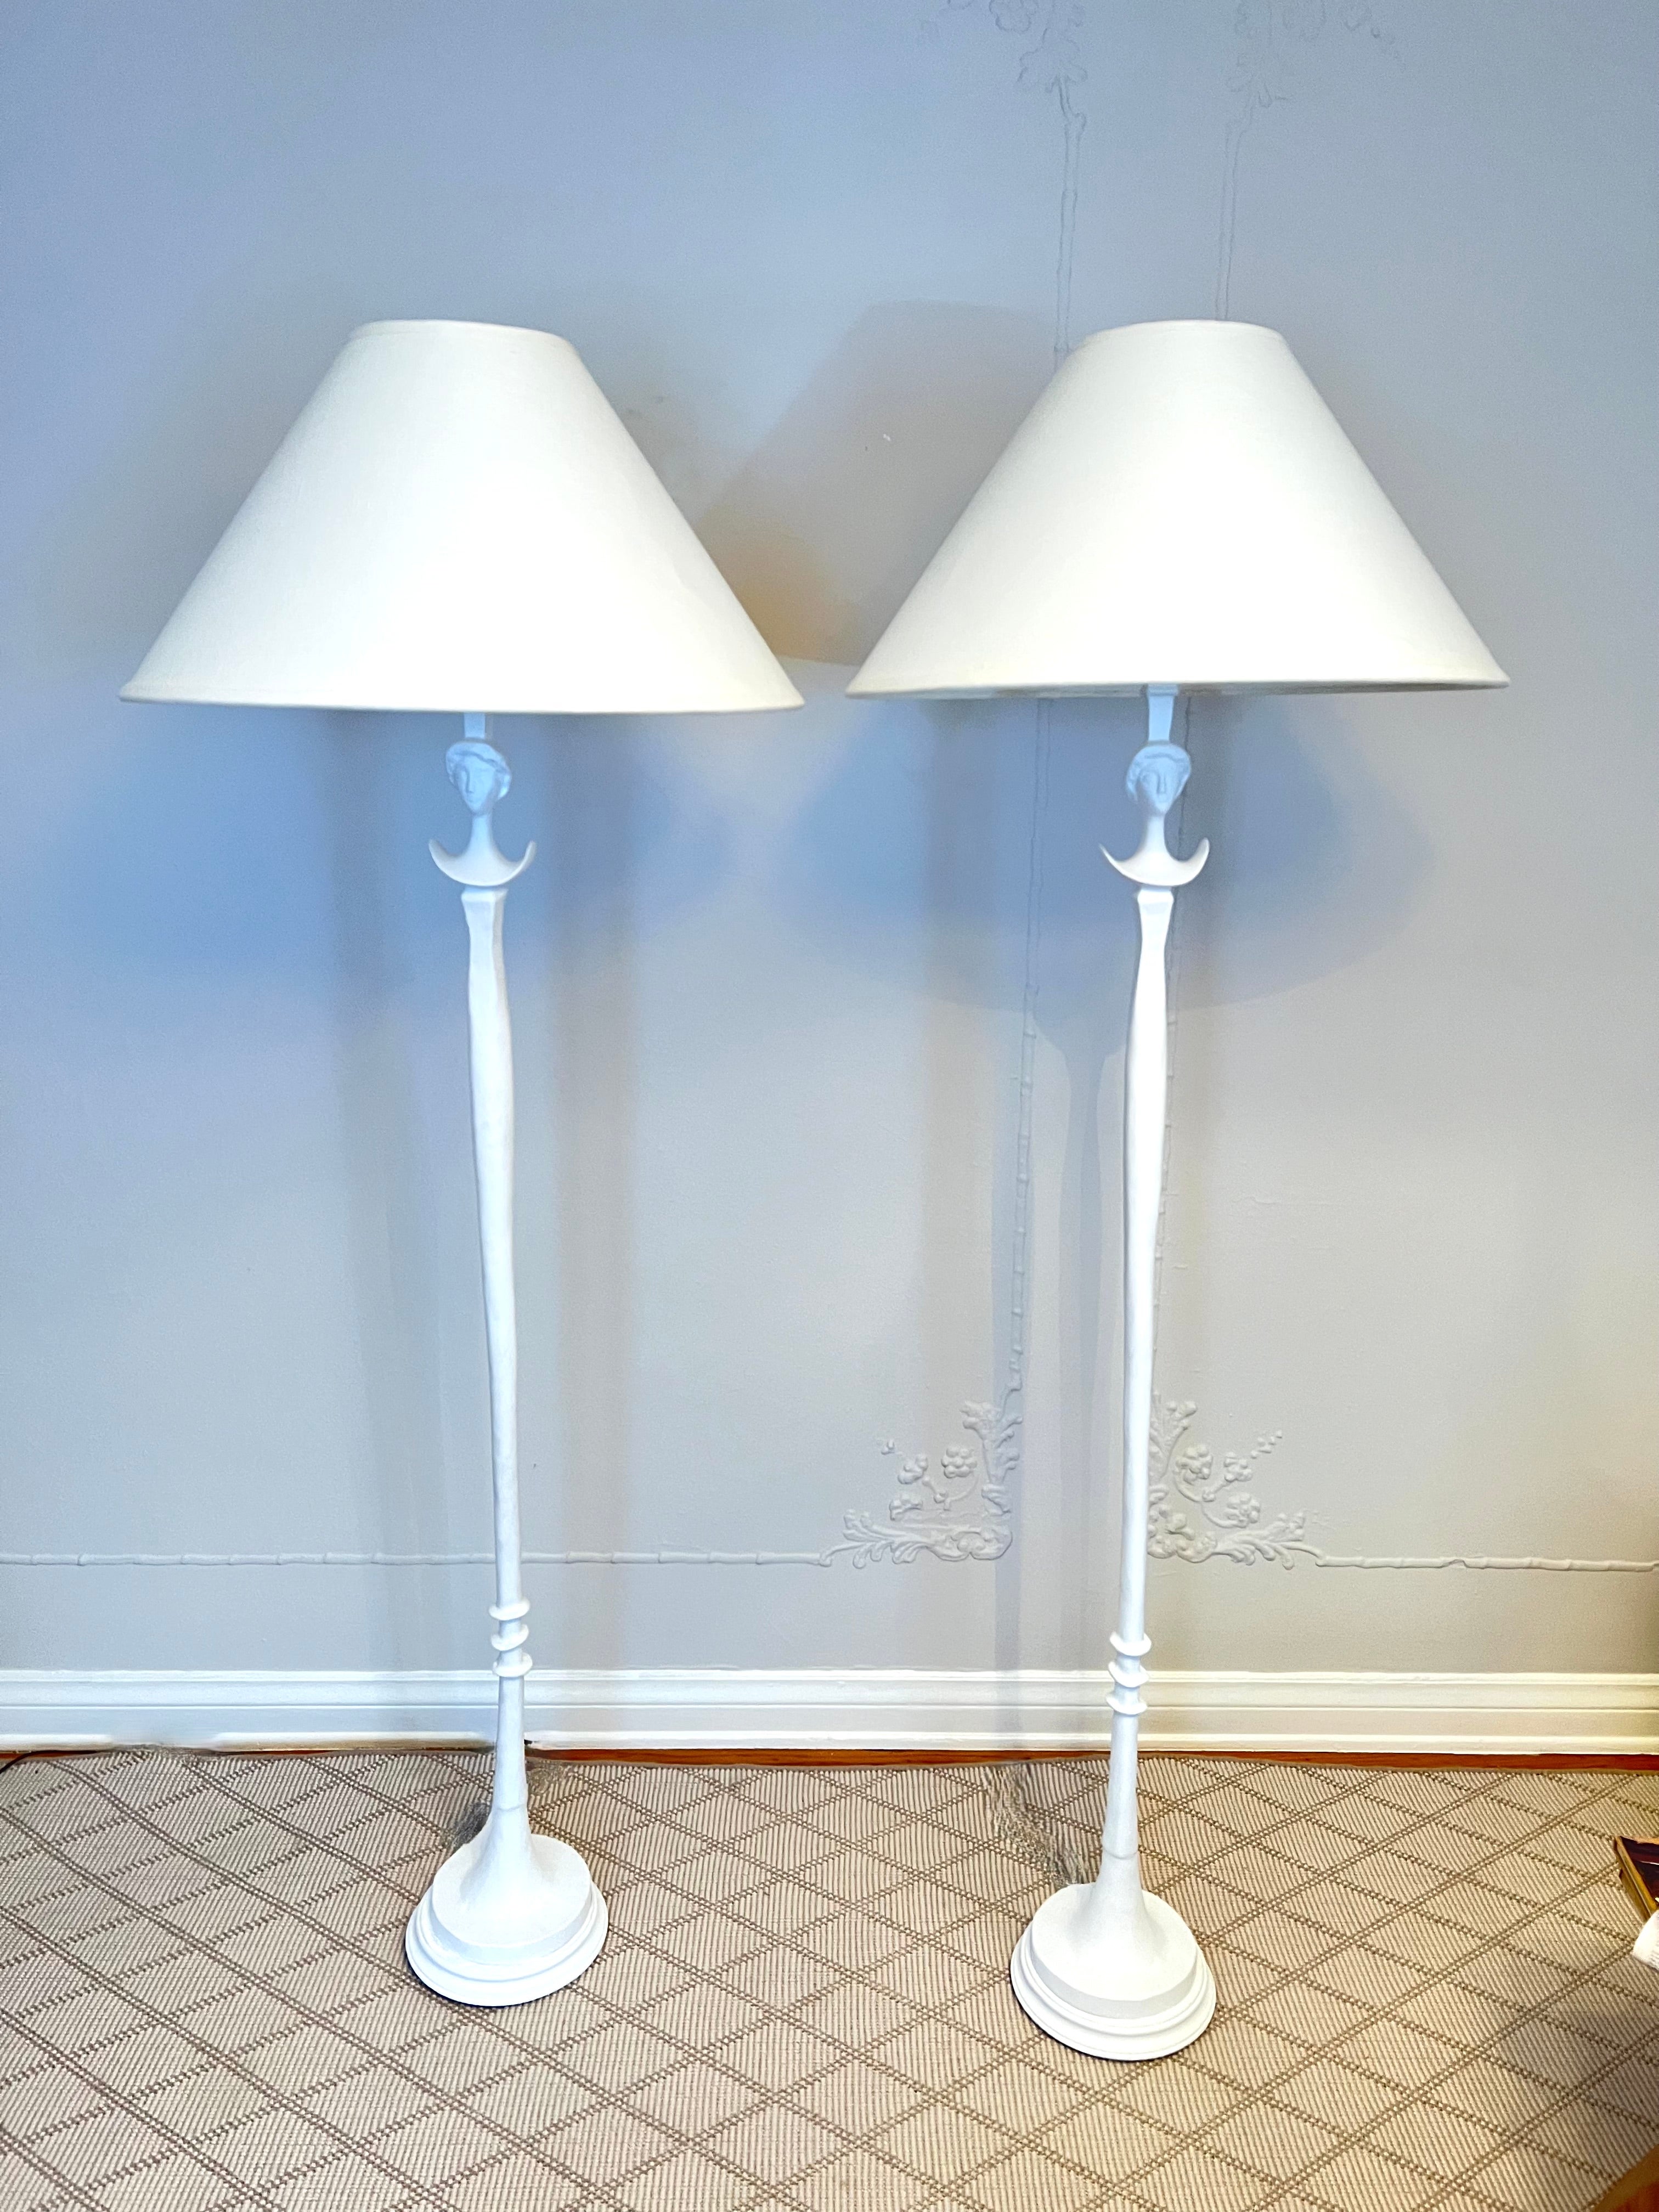 Pair of bronze floor lamps with a white gesso finish in the Style Giacometti - The pair are in wonderful overall condition, the bronze has been repaired and the original finish upgraded to a white gesso finish which is more current and neutral, and